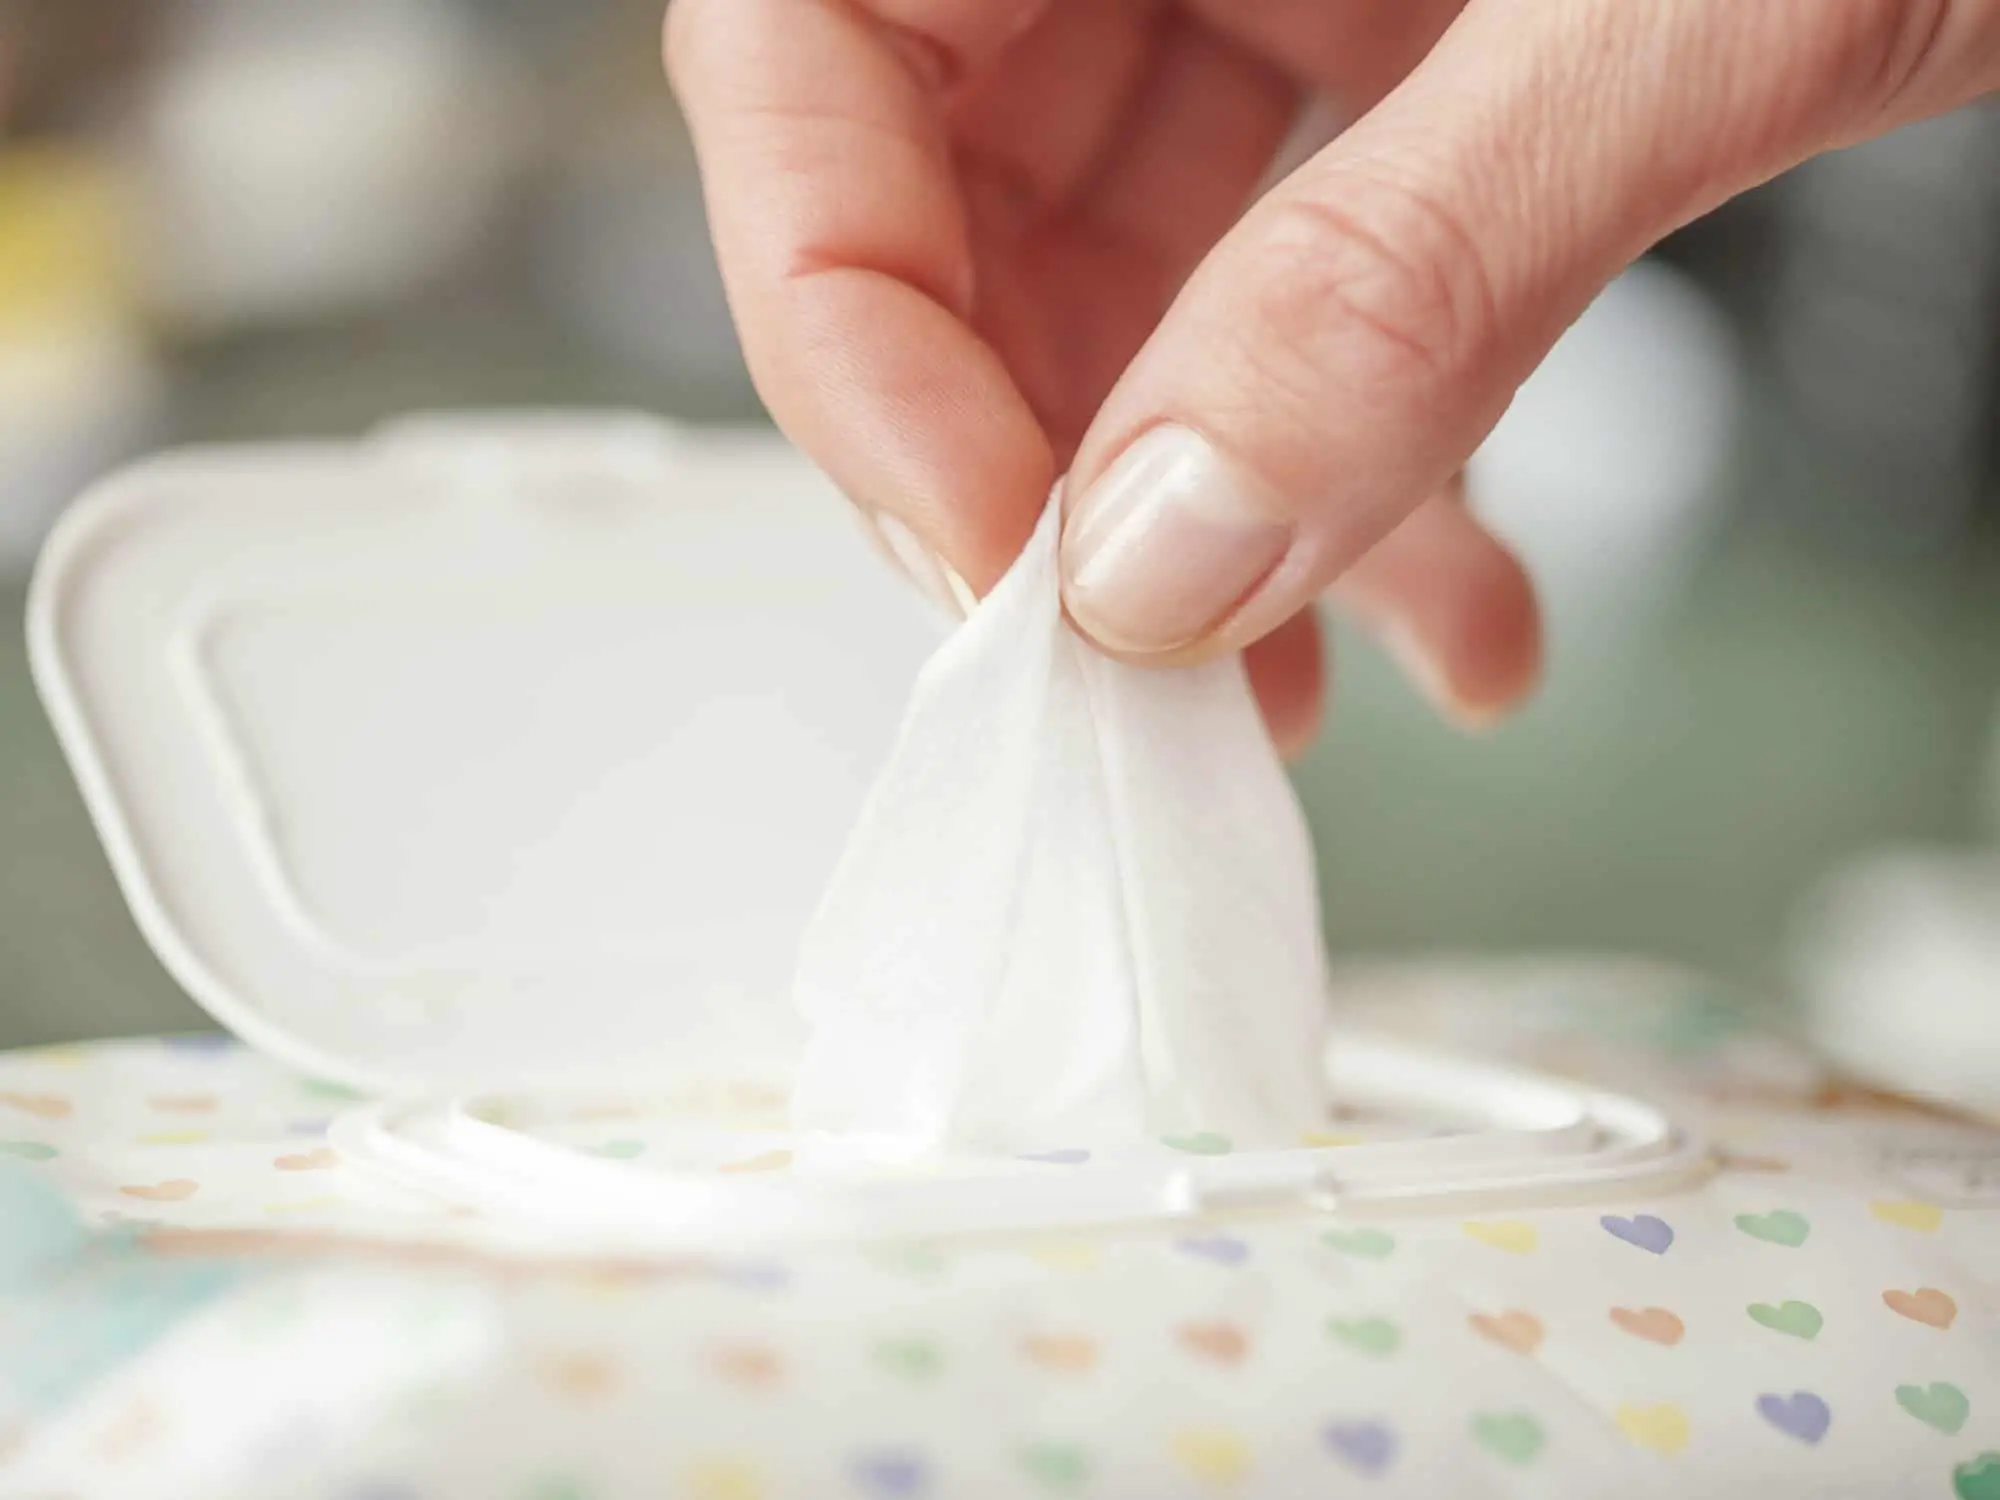 Do baby wipes expire? Find out if baby wipes have expirations dates. How long do baby wipes last?